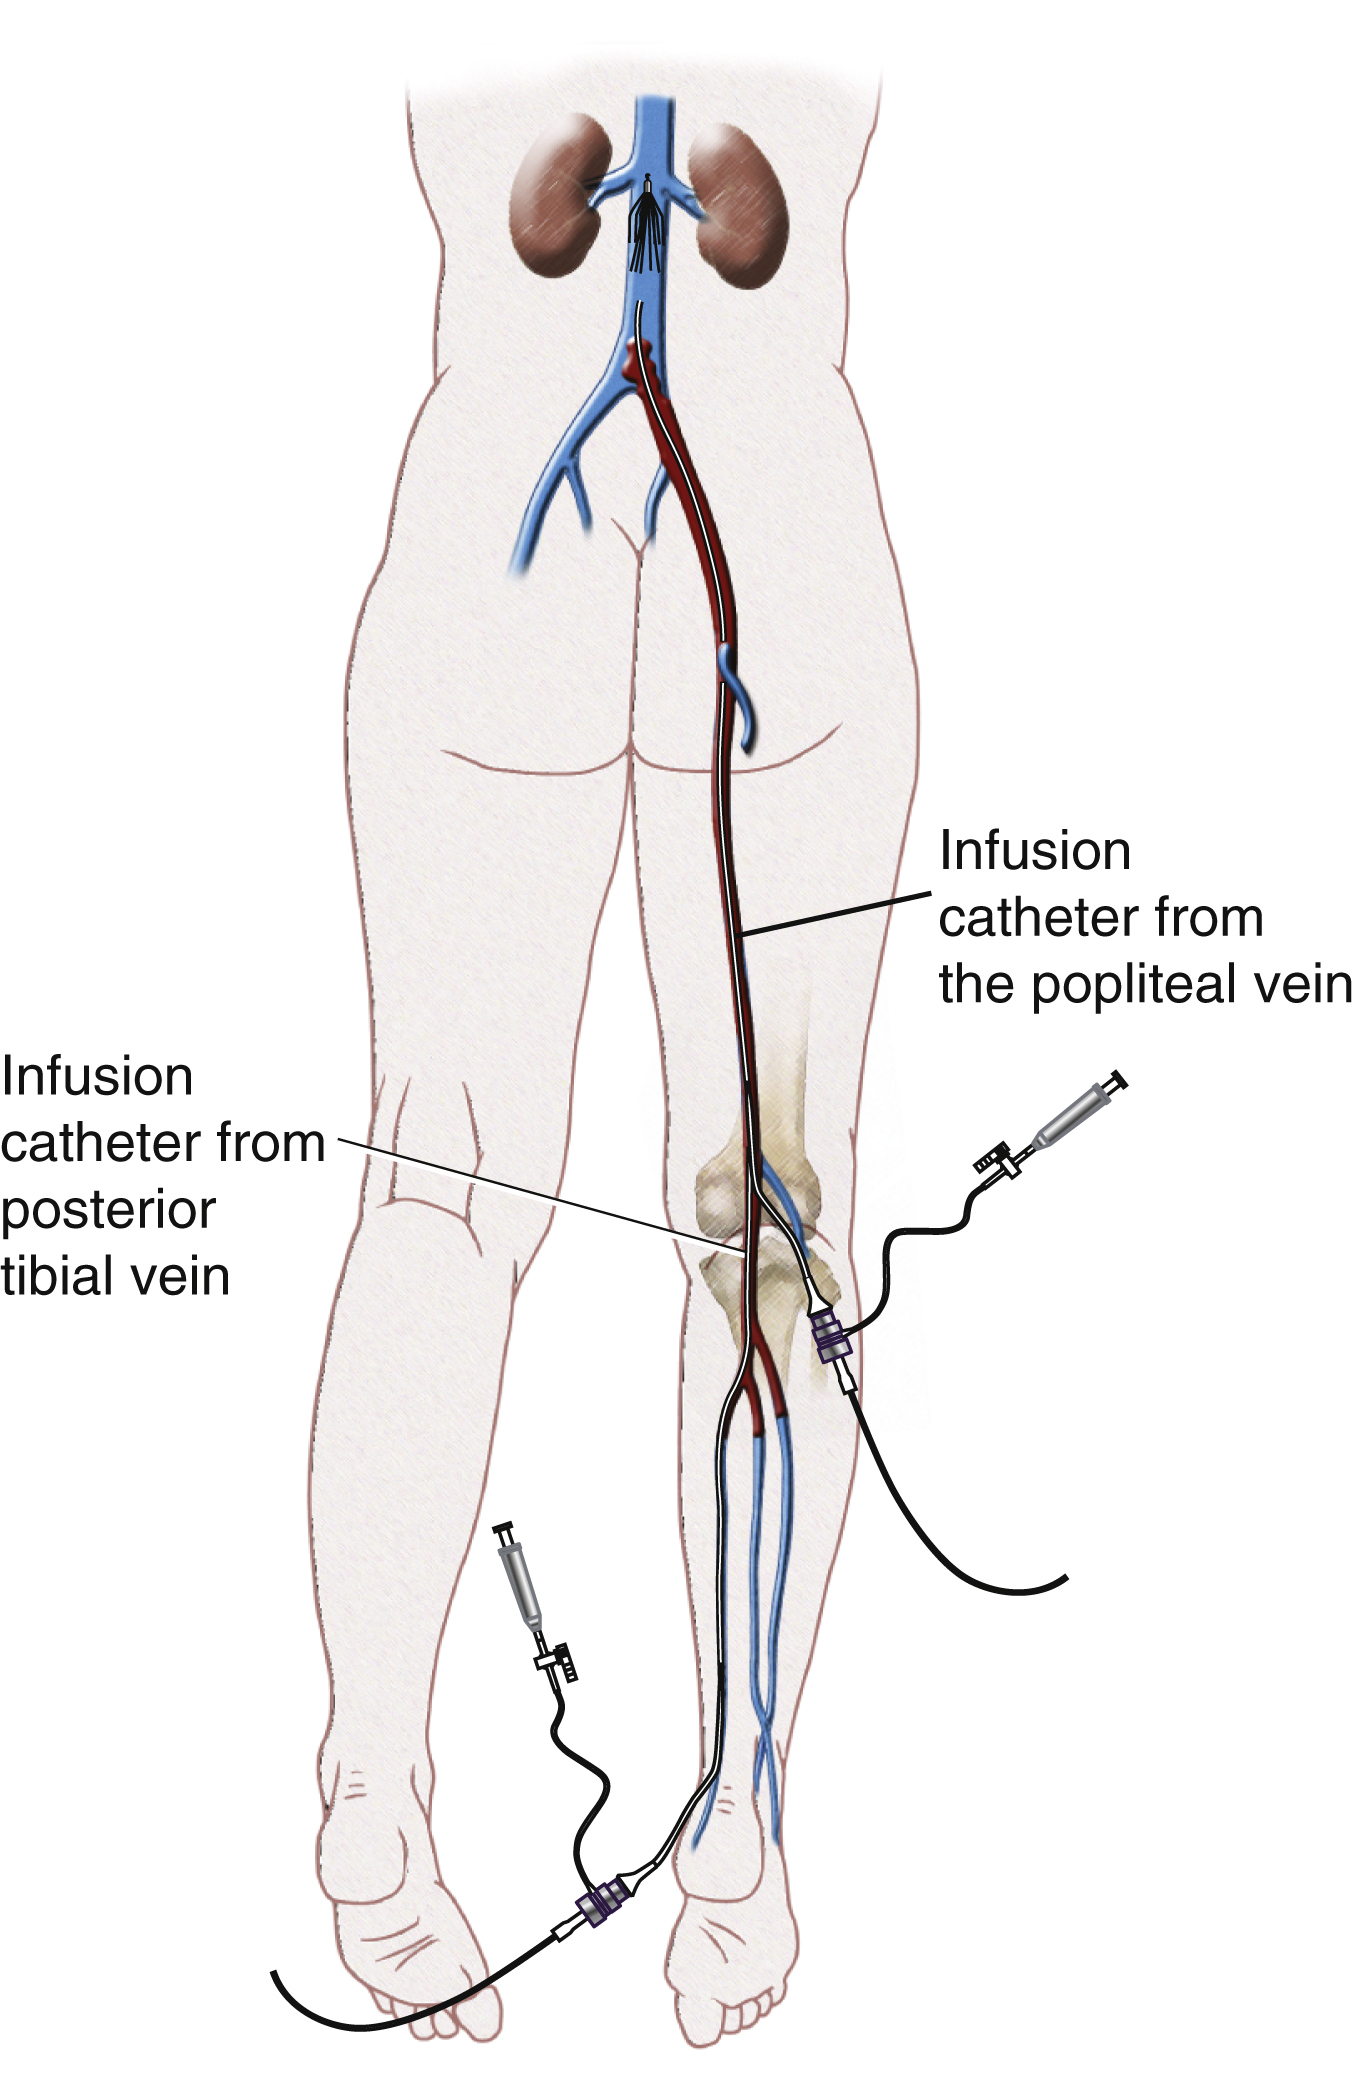 Fig. 70.5, In this case, thrombus extends distal to femoral and popliteal veins into calf veins. Access has been gained to posterior tibial vein via ankle, and an introducer sheath has been placed there. Infusion catheter has been placed. Infusion catheter should overlap with infusion catheter already in place from popliteal vein.